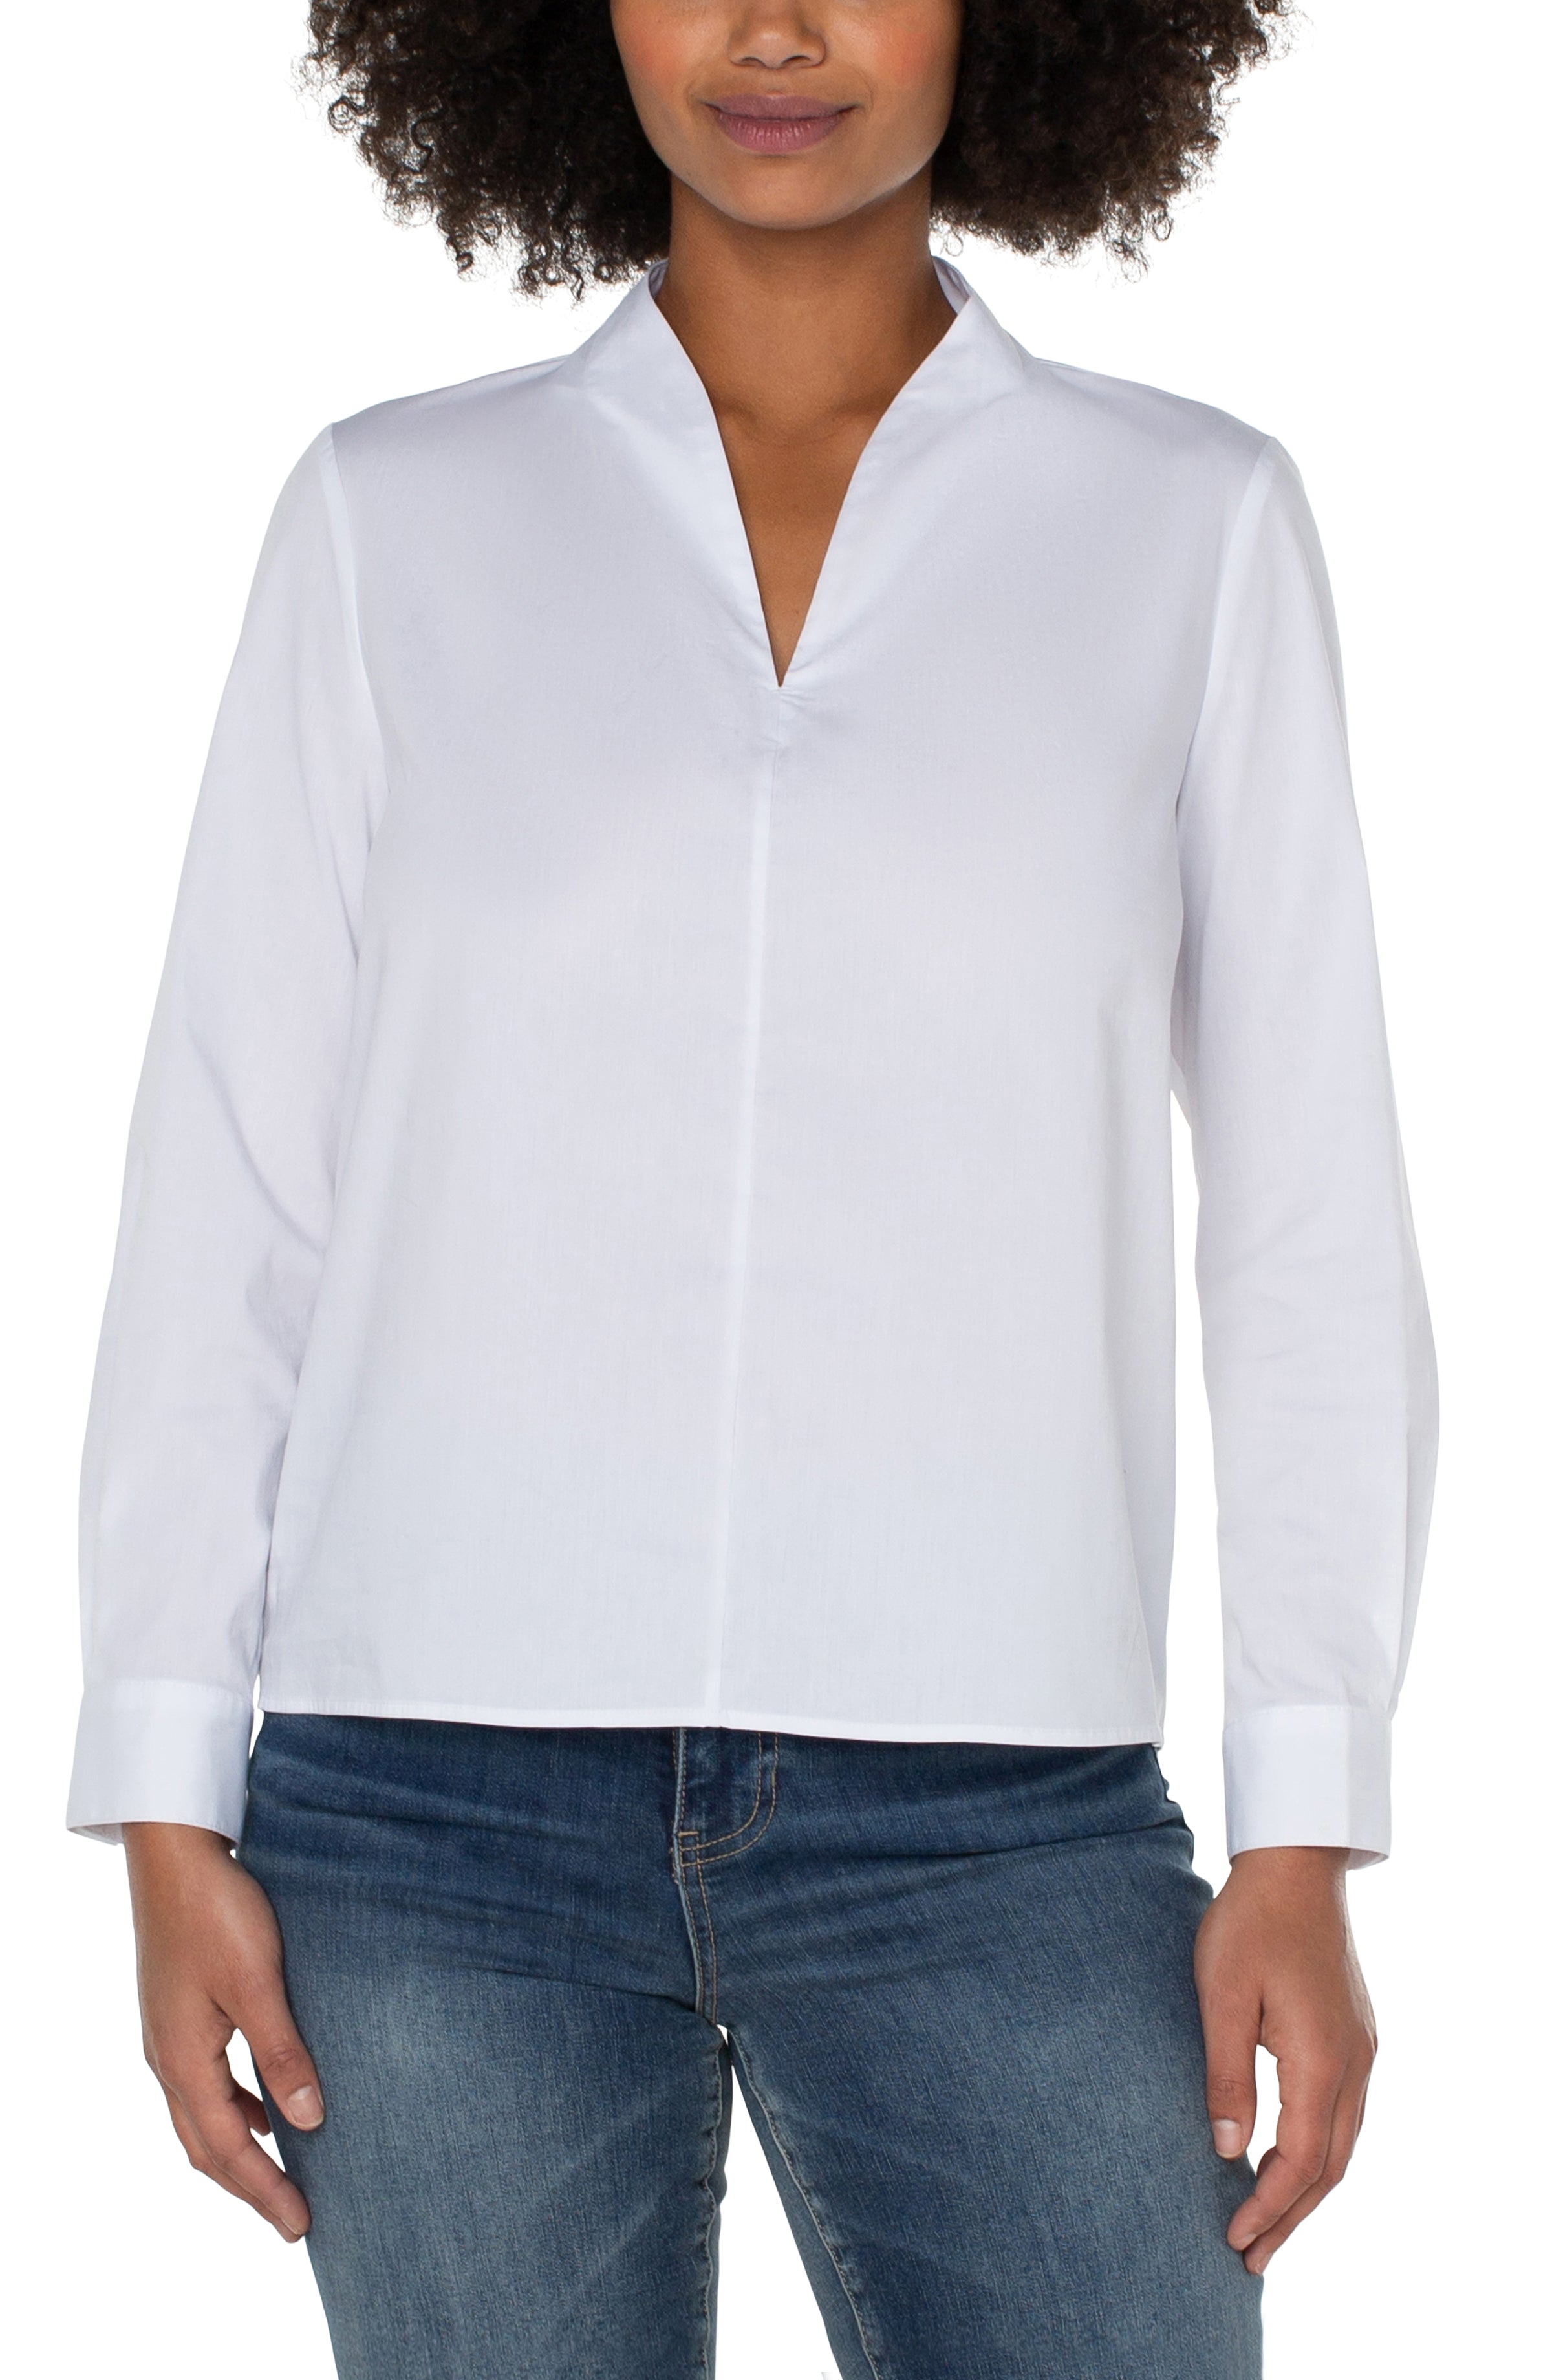 Liverpool V Neck Long Sleeve Woven Top - White